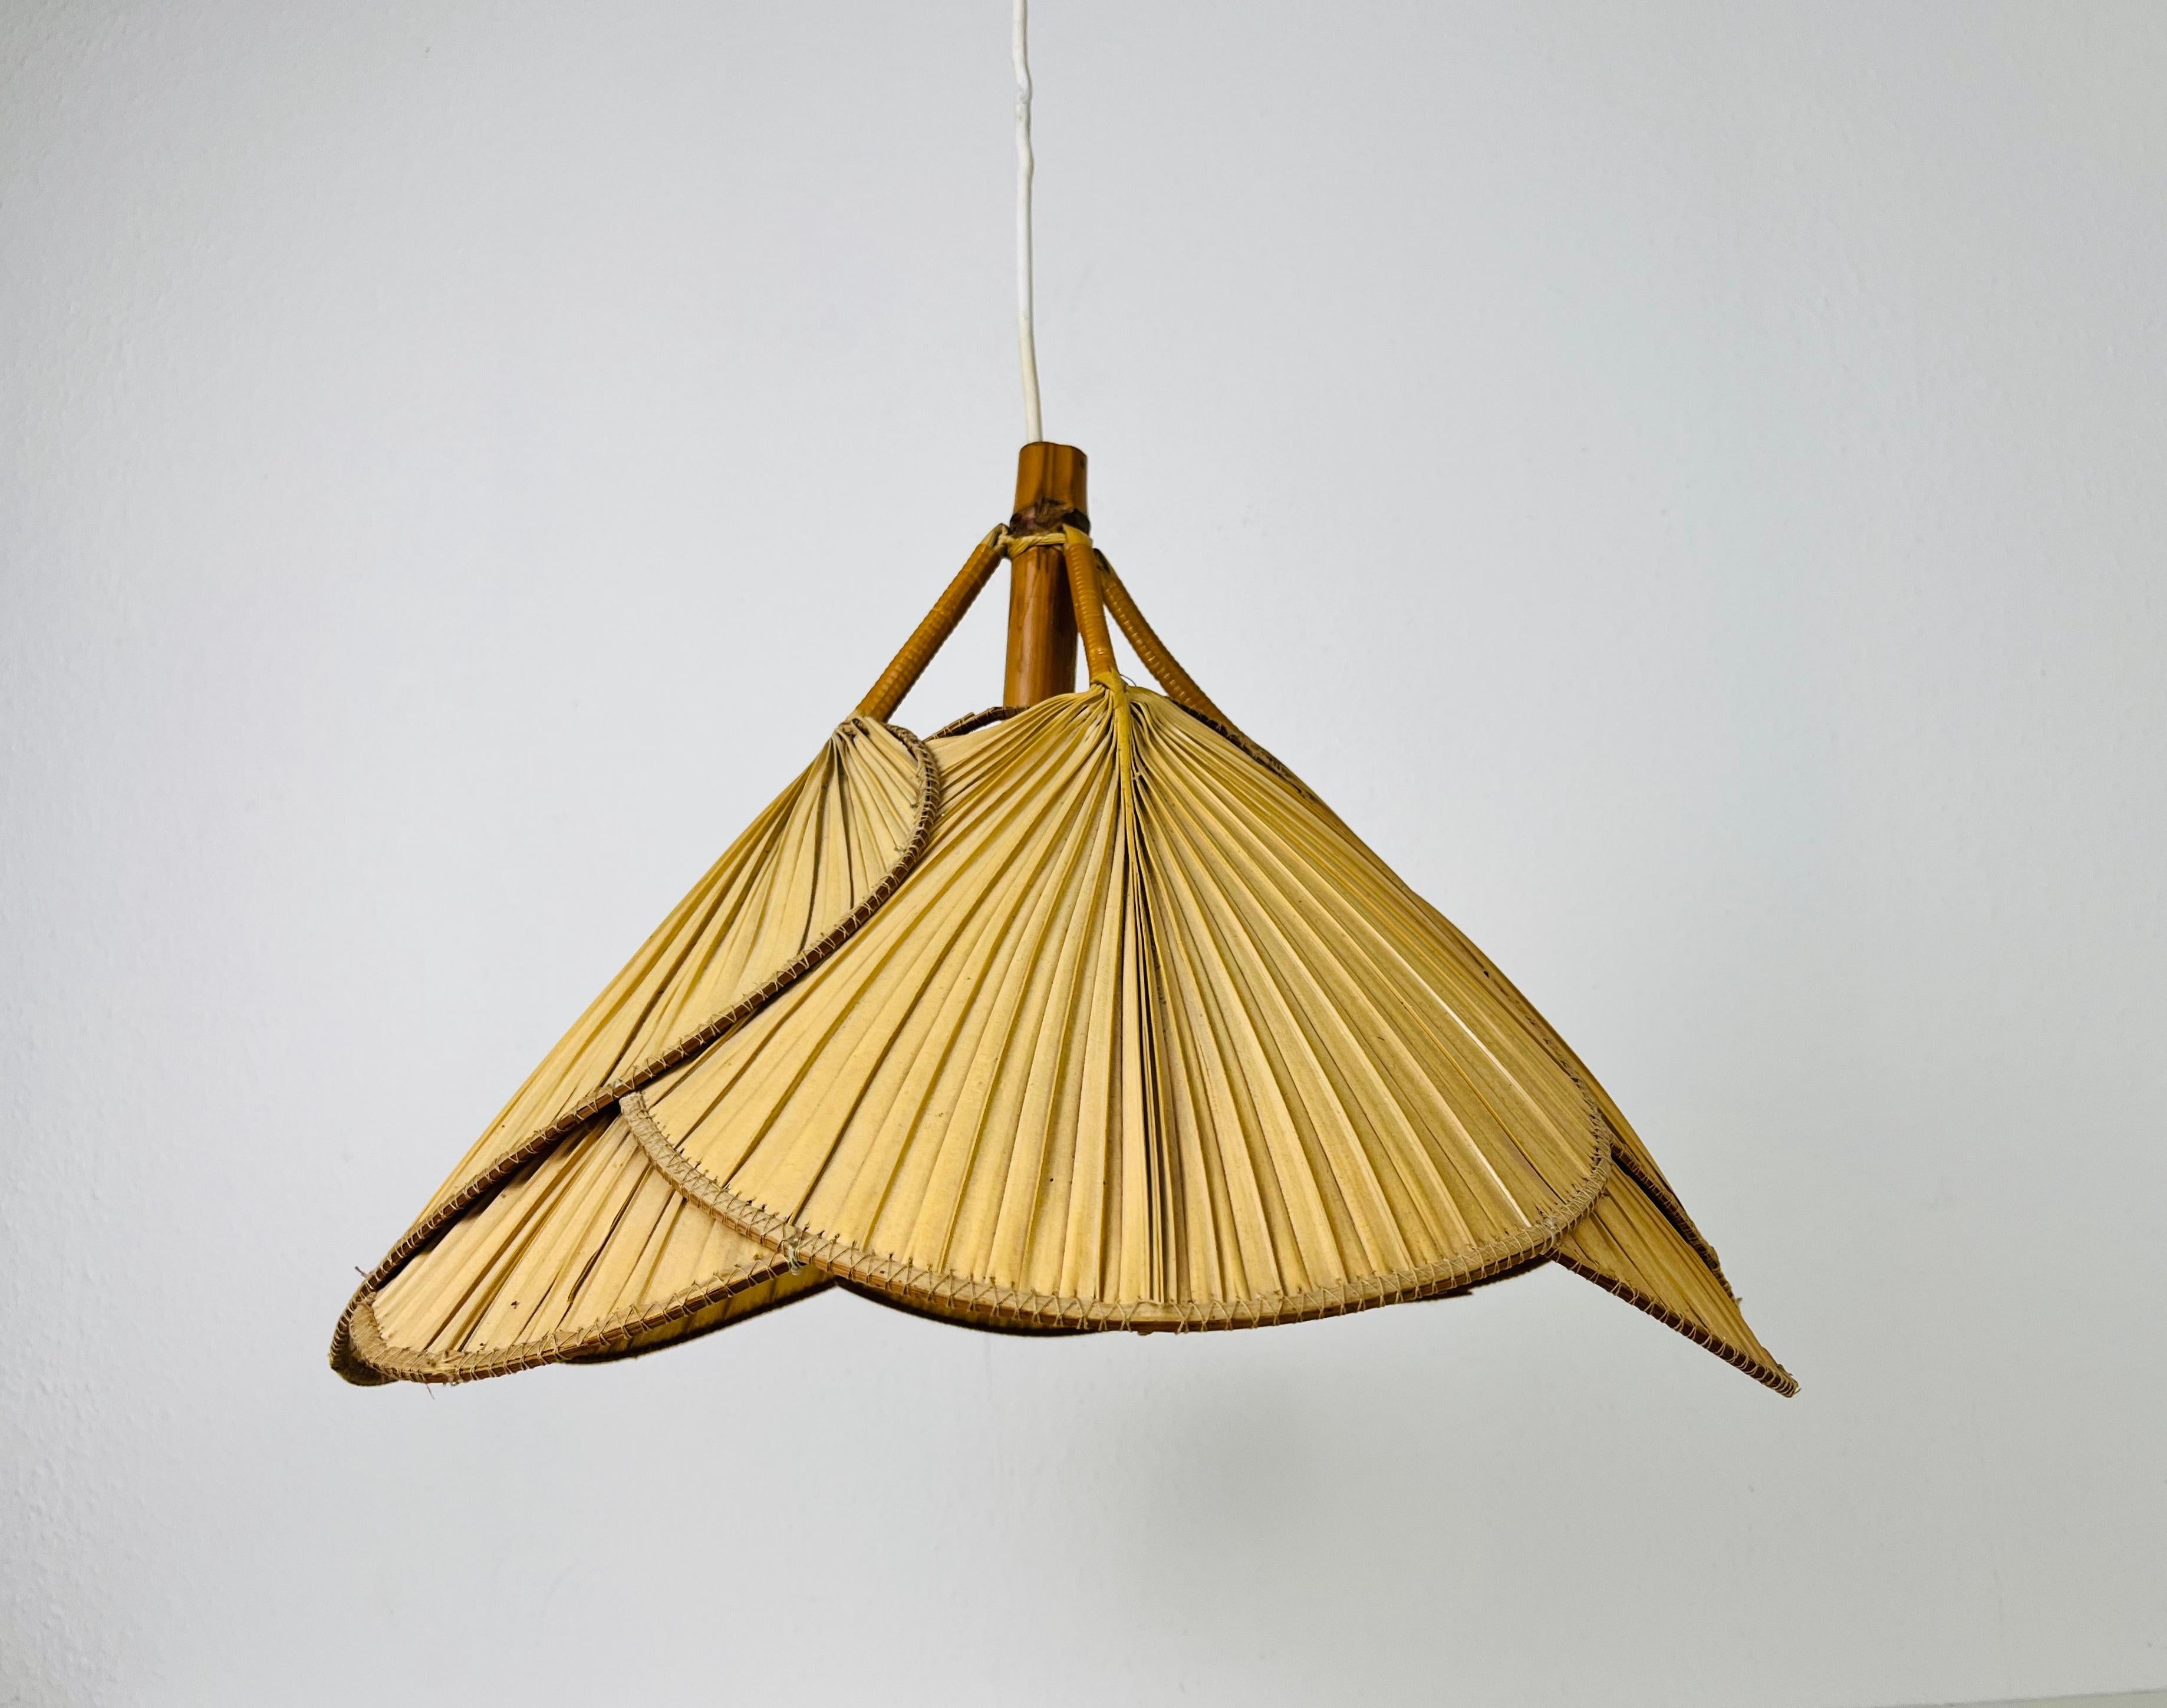 Iconic pendant lamp in the style of Ingo Maurer made in the 1960s. The lighting is made of bamboo and thin paper. It gives beautiful natural light.

Dimensions
height: 31-90 cm
diameter: 48 cm

The light requires one E27 (US E26) light bulb.